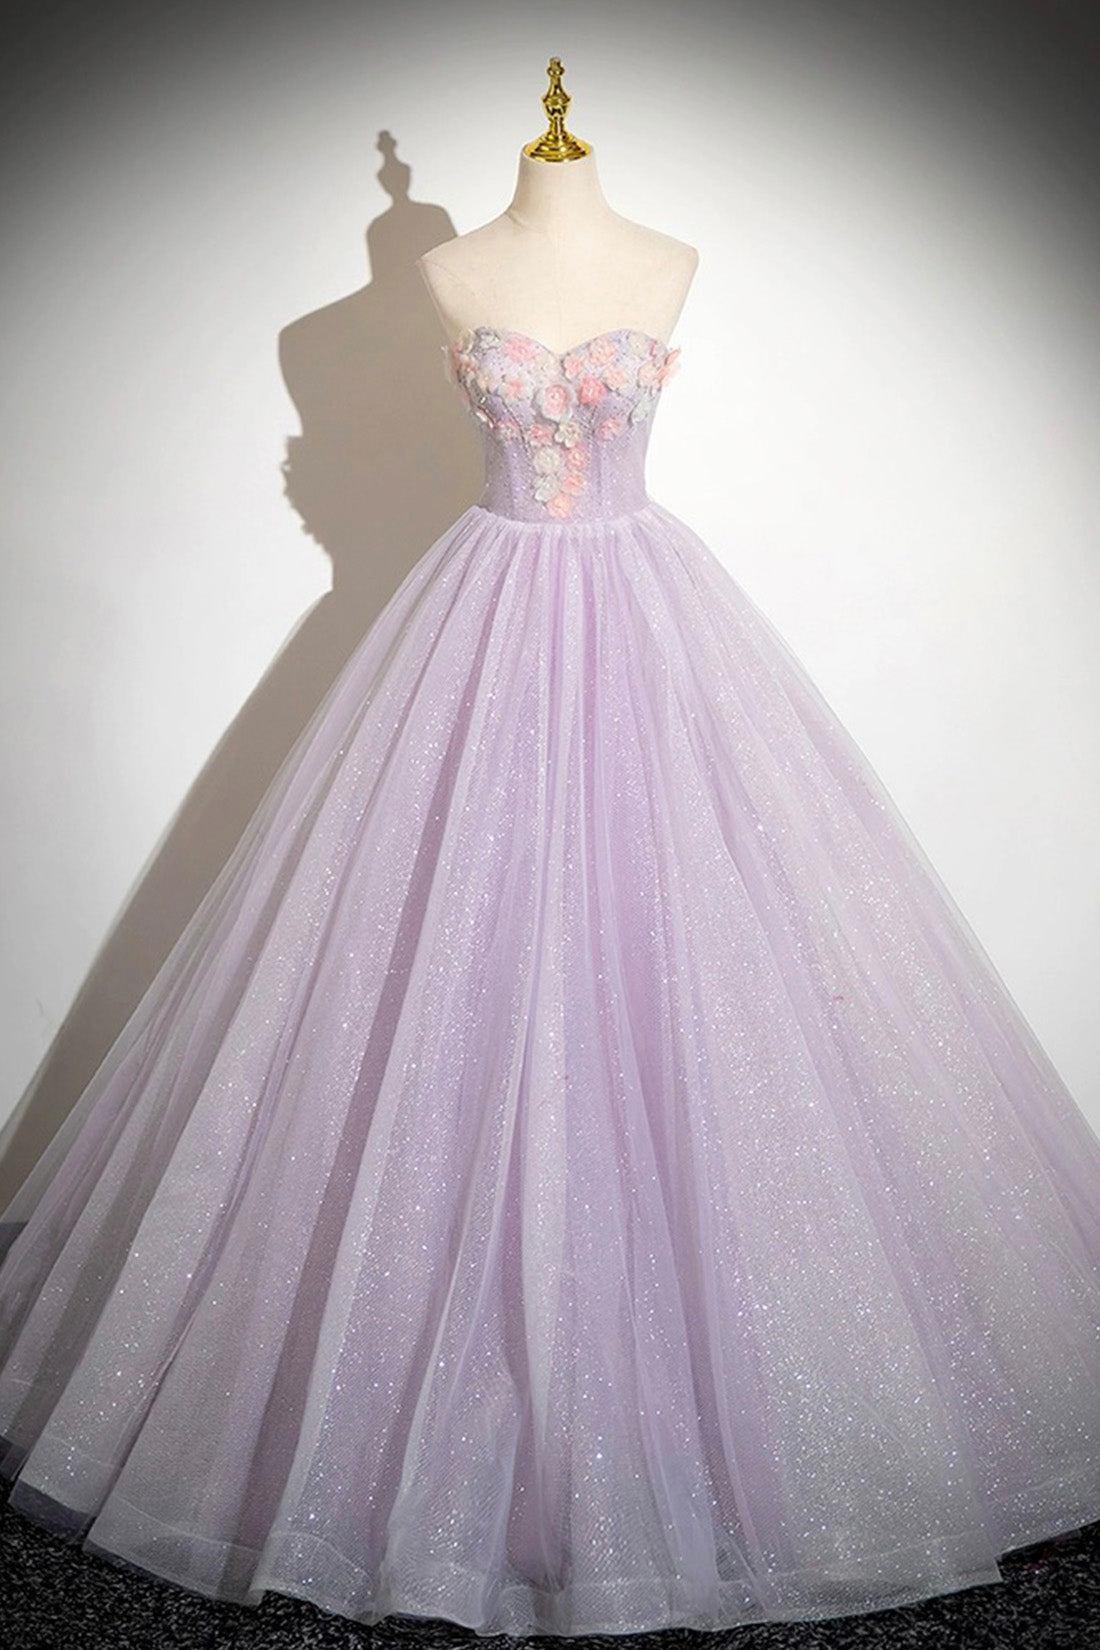 Lilac Strapless Tulle Long Prom Dresses with Flowers, Lilac Off the Shoulder Formal Evening Dresses